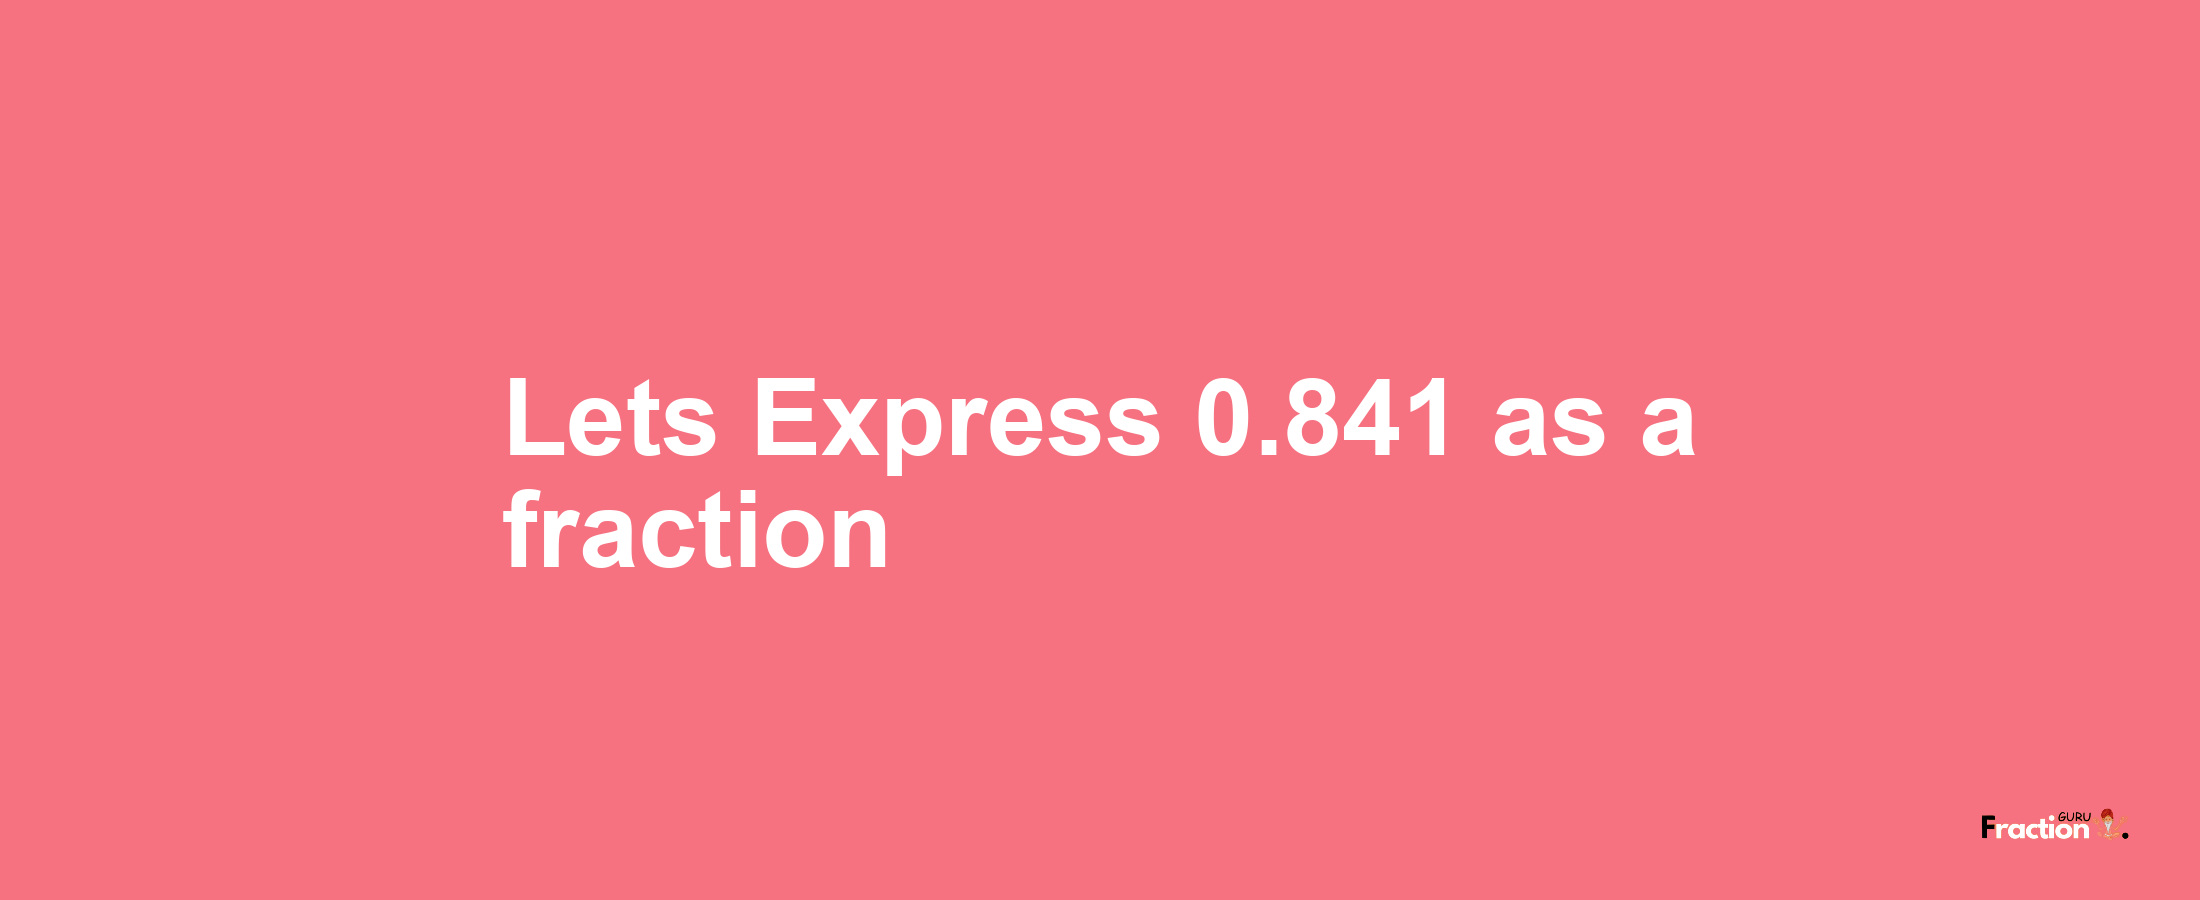 Lets Express 0.841 as afraction